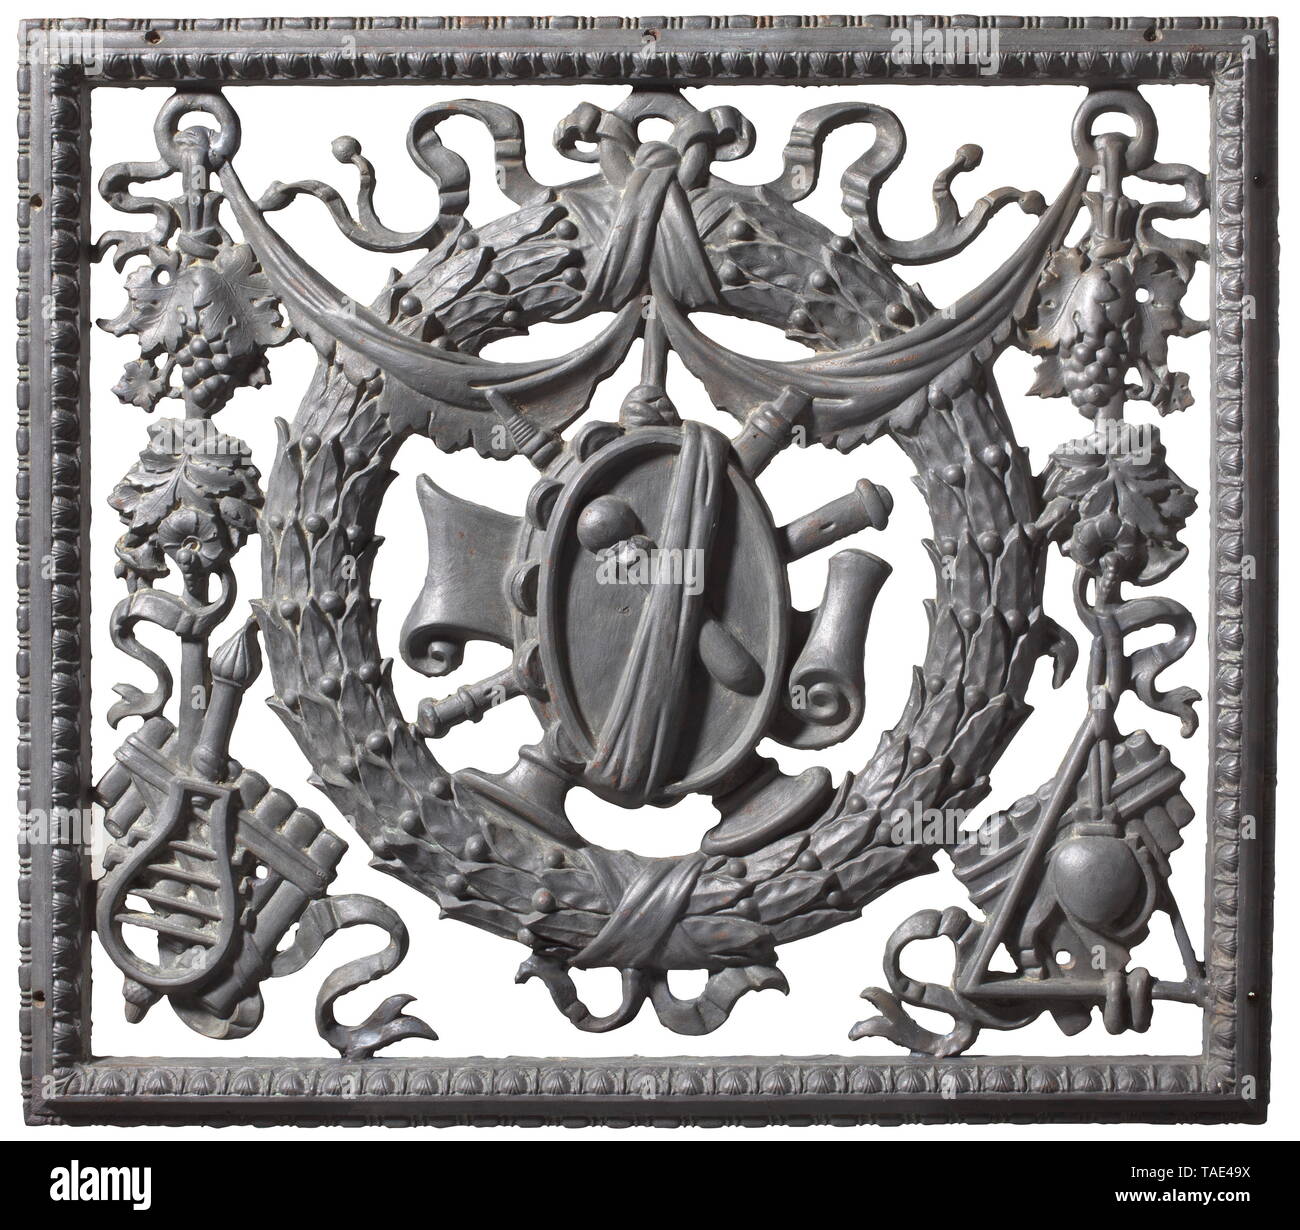 A German decorative grille, cast iron with musical instruments motif, circa 1880 Openwork cast rectangular grille with framing in relief. Drum with drumstick depicted in the centre, surrounded by wind instruments and laurel wreath. In the lower corners pan flutes amidst scrollwork and tendril decoration. Dimensions 74 x 84 cm. historic, historical, 19th century, Additional-Rights-Clearance-Info-Not-Available Stock Photo